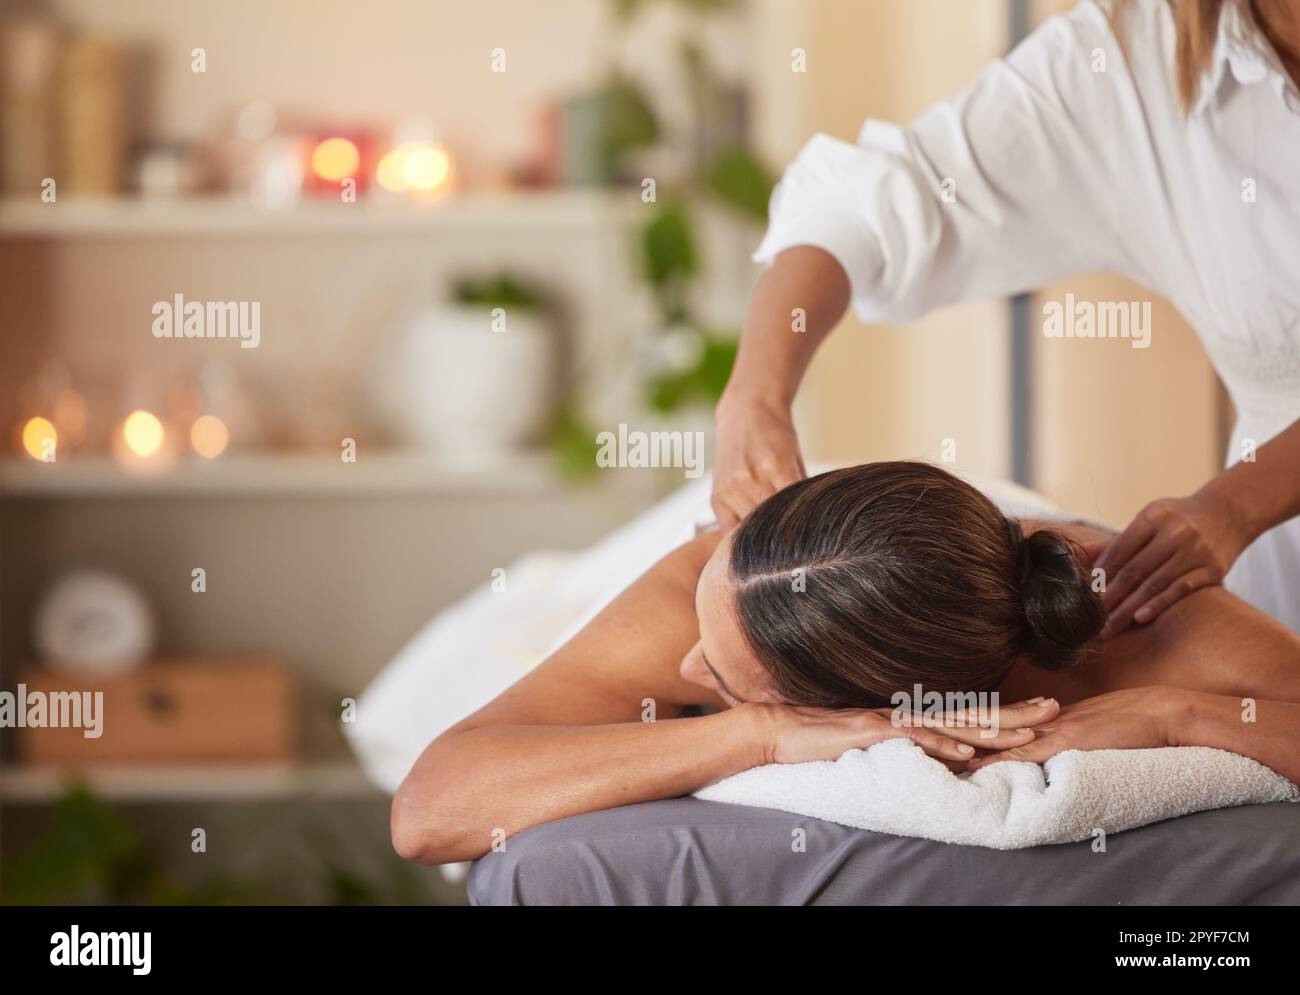 Massage, relax and peace with woman in spa for healing, health and zen treatment. Detox, skincare and beauty with hands of massage therapist on customer for calm, physical therapy or luxury in salon Stock Photo